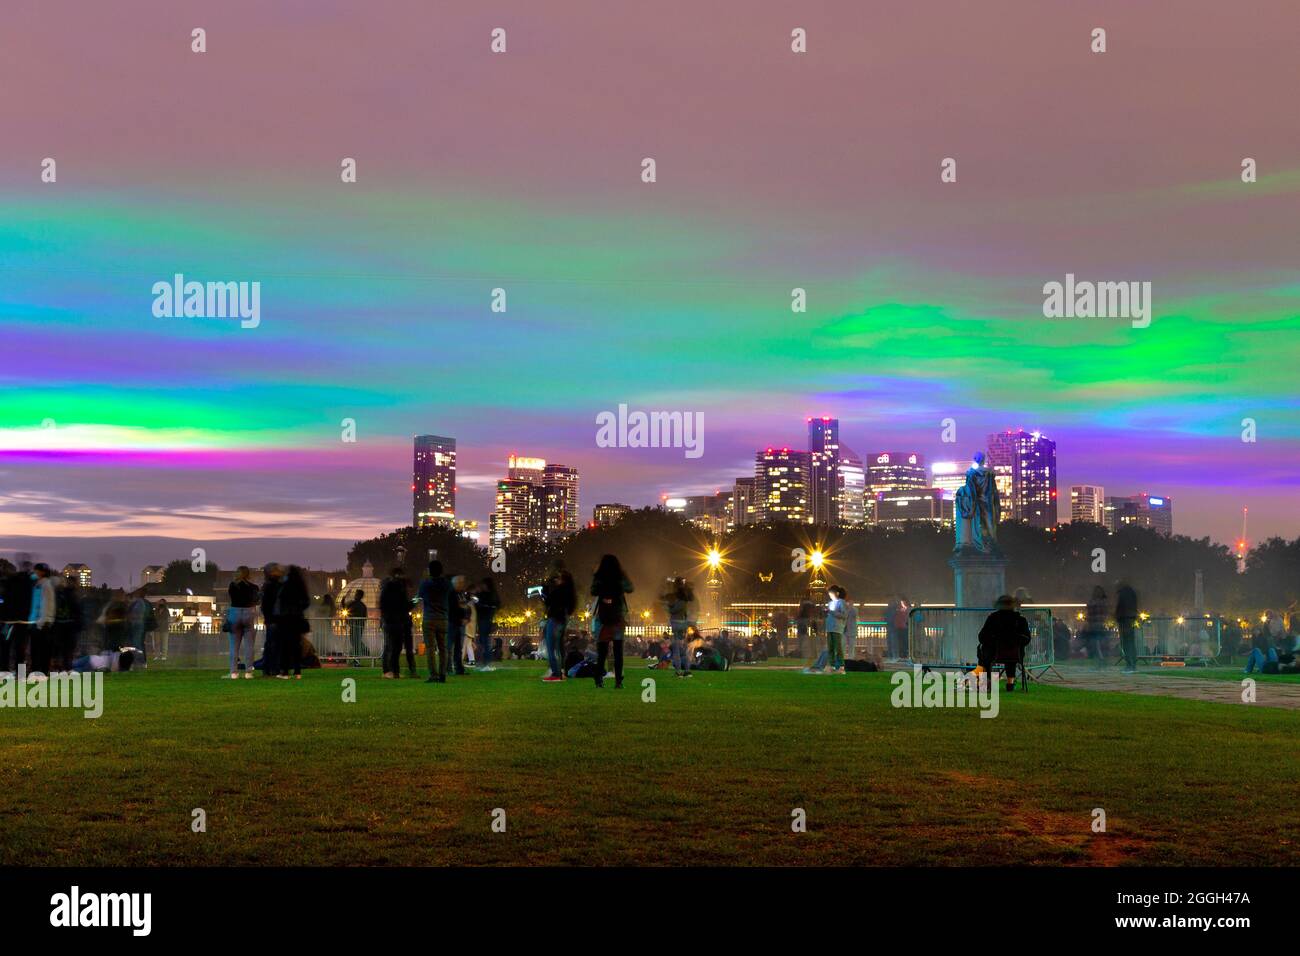 Borealis light installation by Dan Acher, Greenwich and Docklands International Festival, Canary Wharf in background, Old Royal Naval College, London Stock Photo